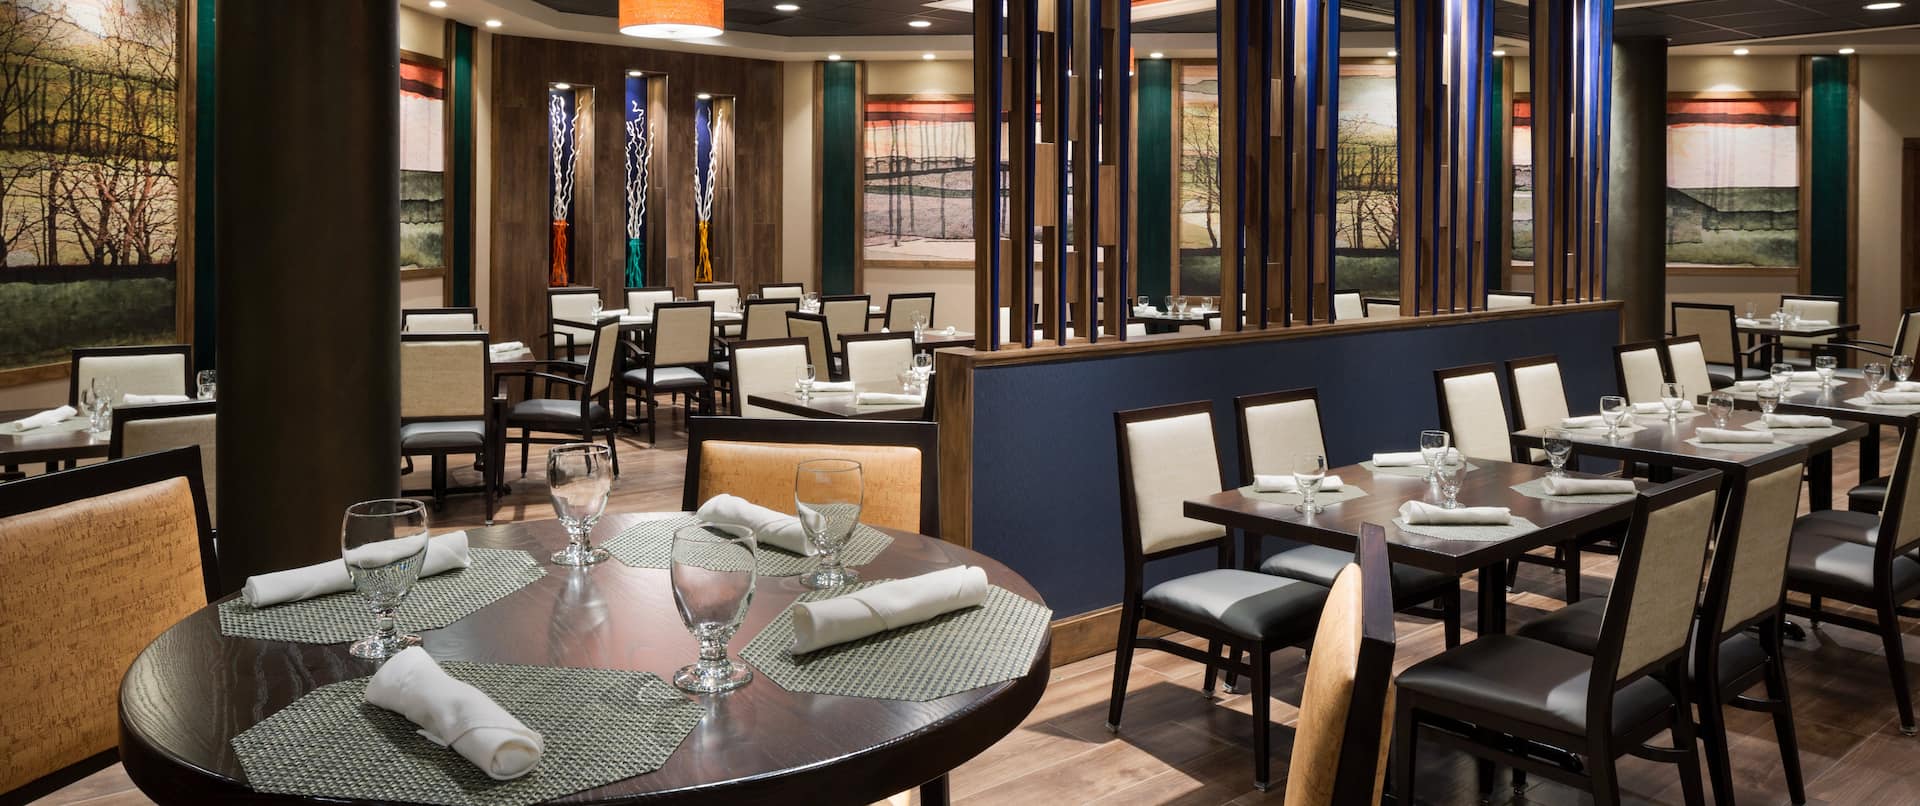 Windows, Wall Art, Chairs, and Mixed Tables With Place Settings in Dining Area of Seasonz Restaurant